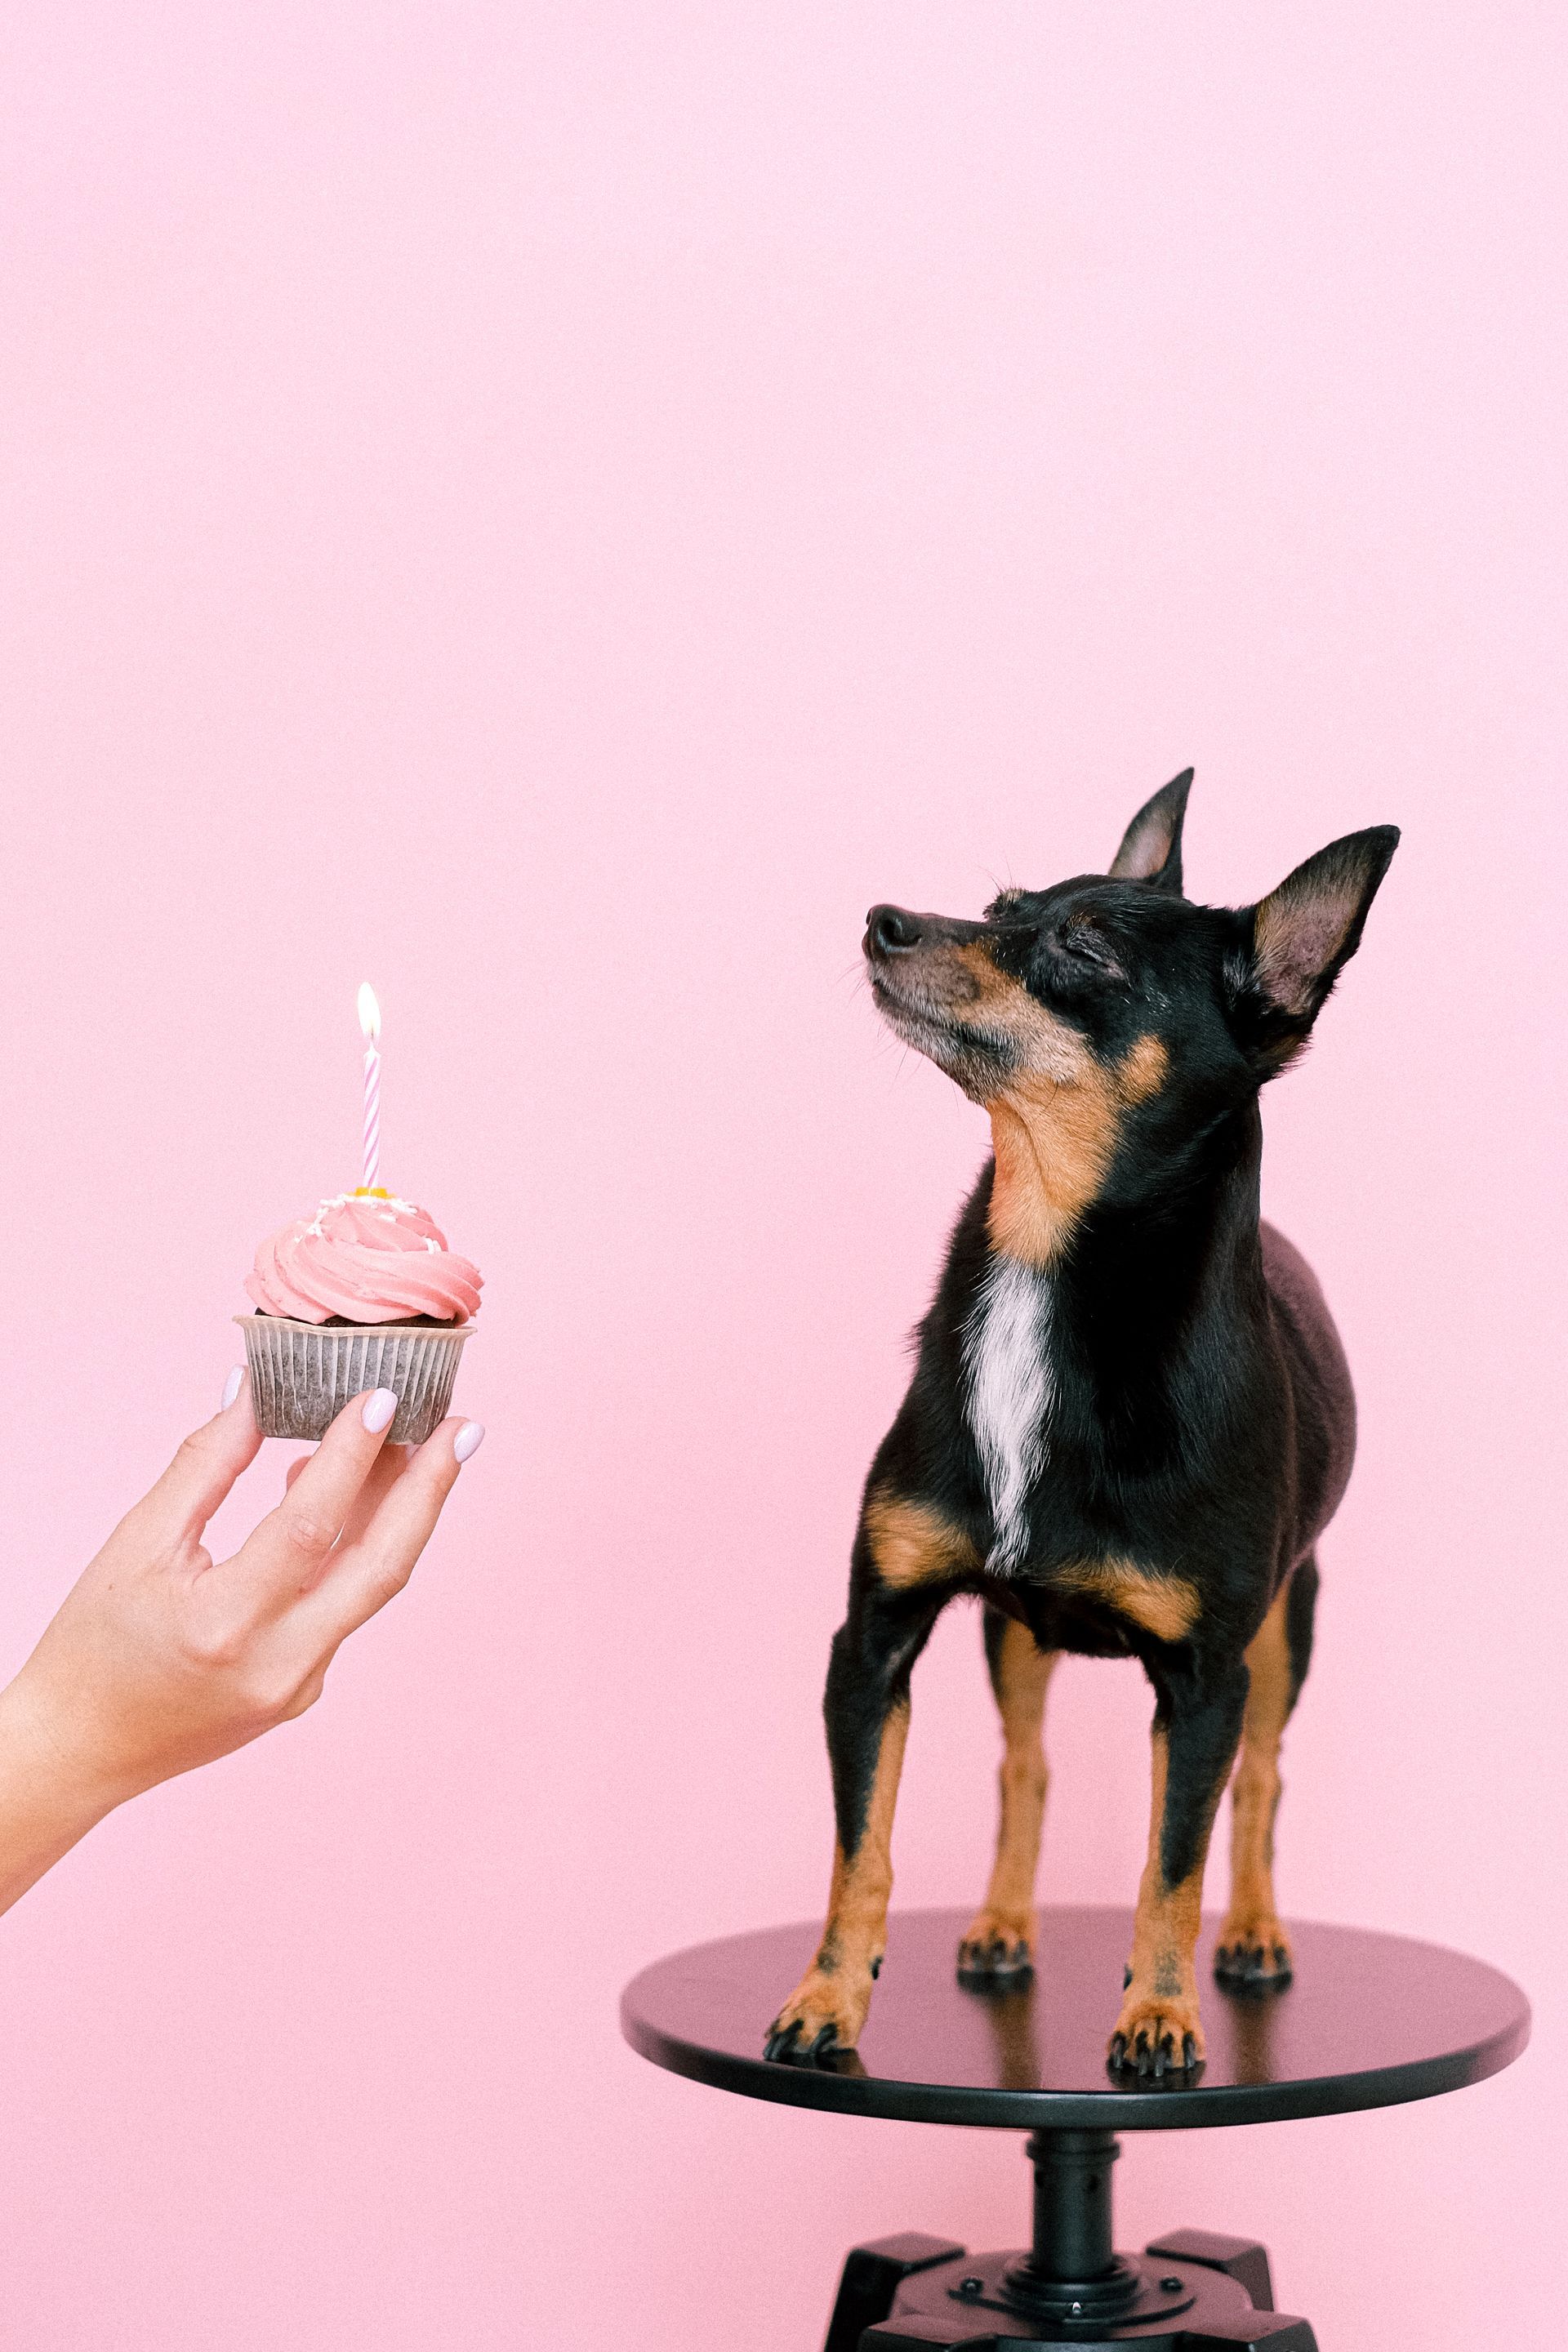 a person is holding a cupcake in front of a dog .